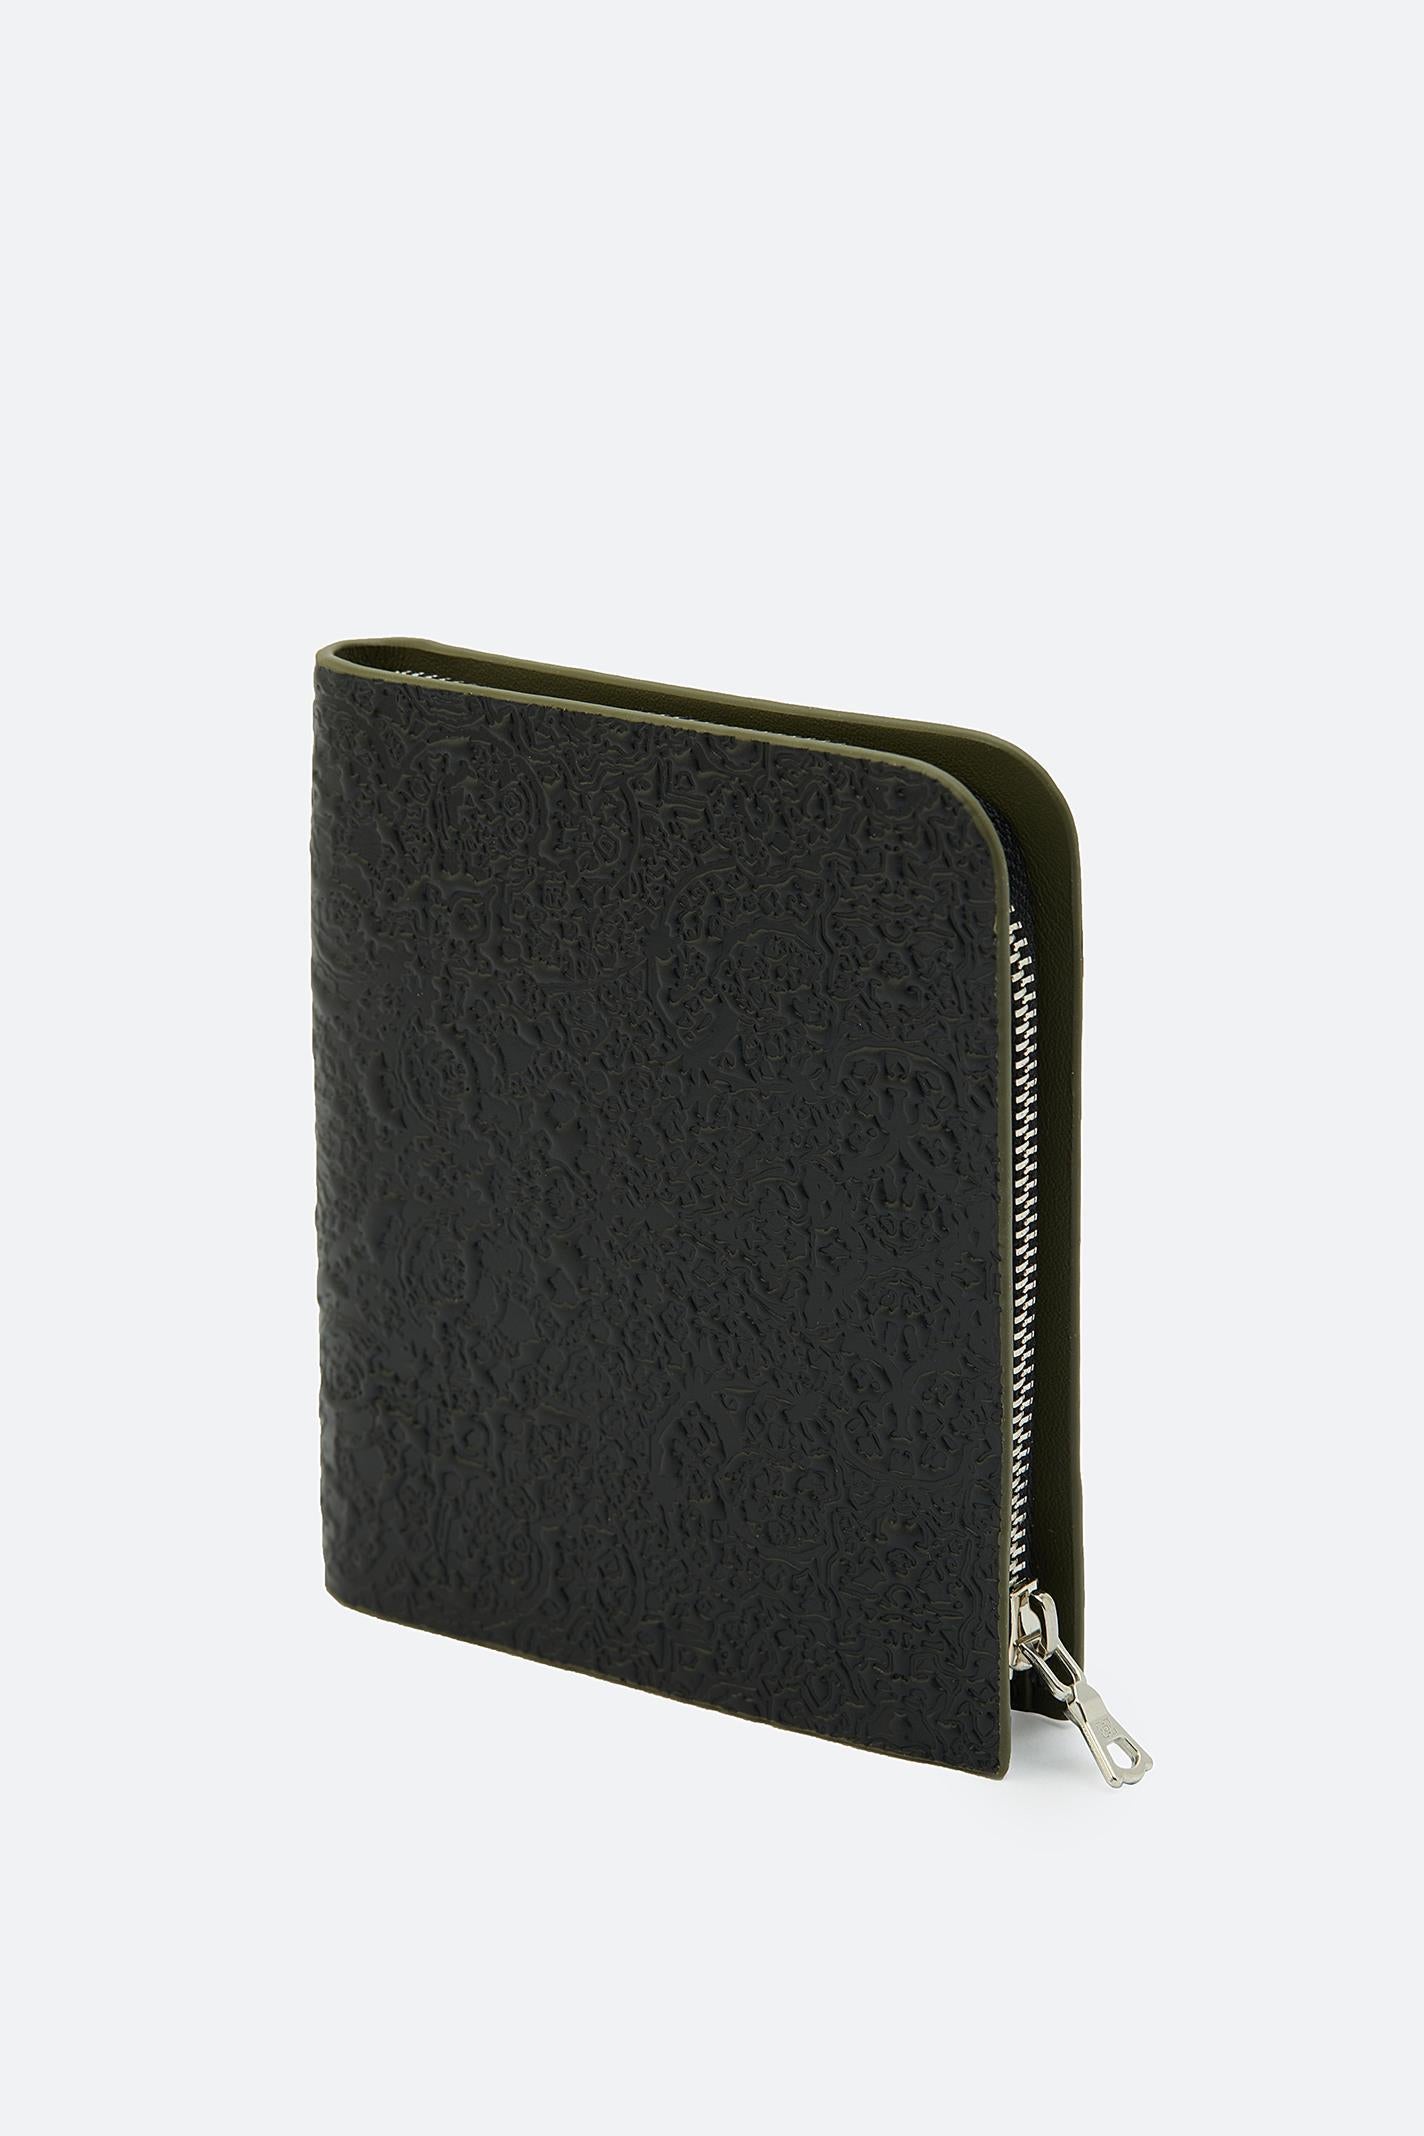  EMBOSSED LARGE ZIPPED WALLET 067